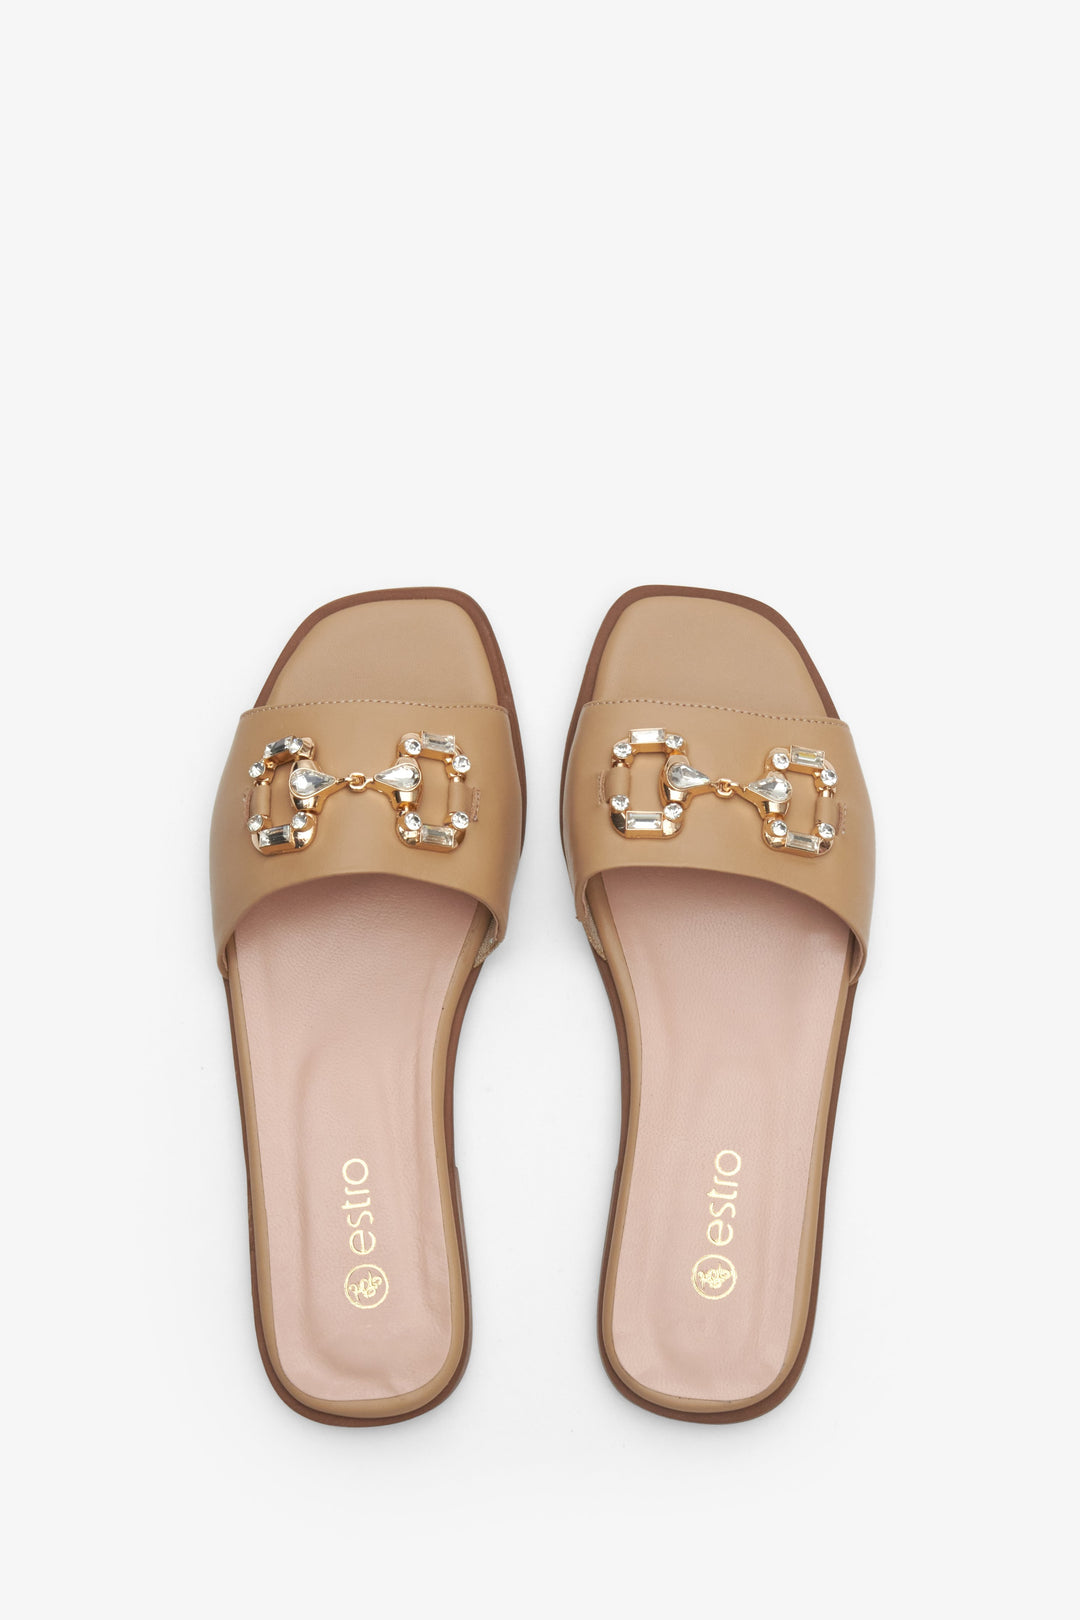 Beige flat sandals with gold ornament Estro.